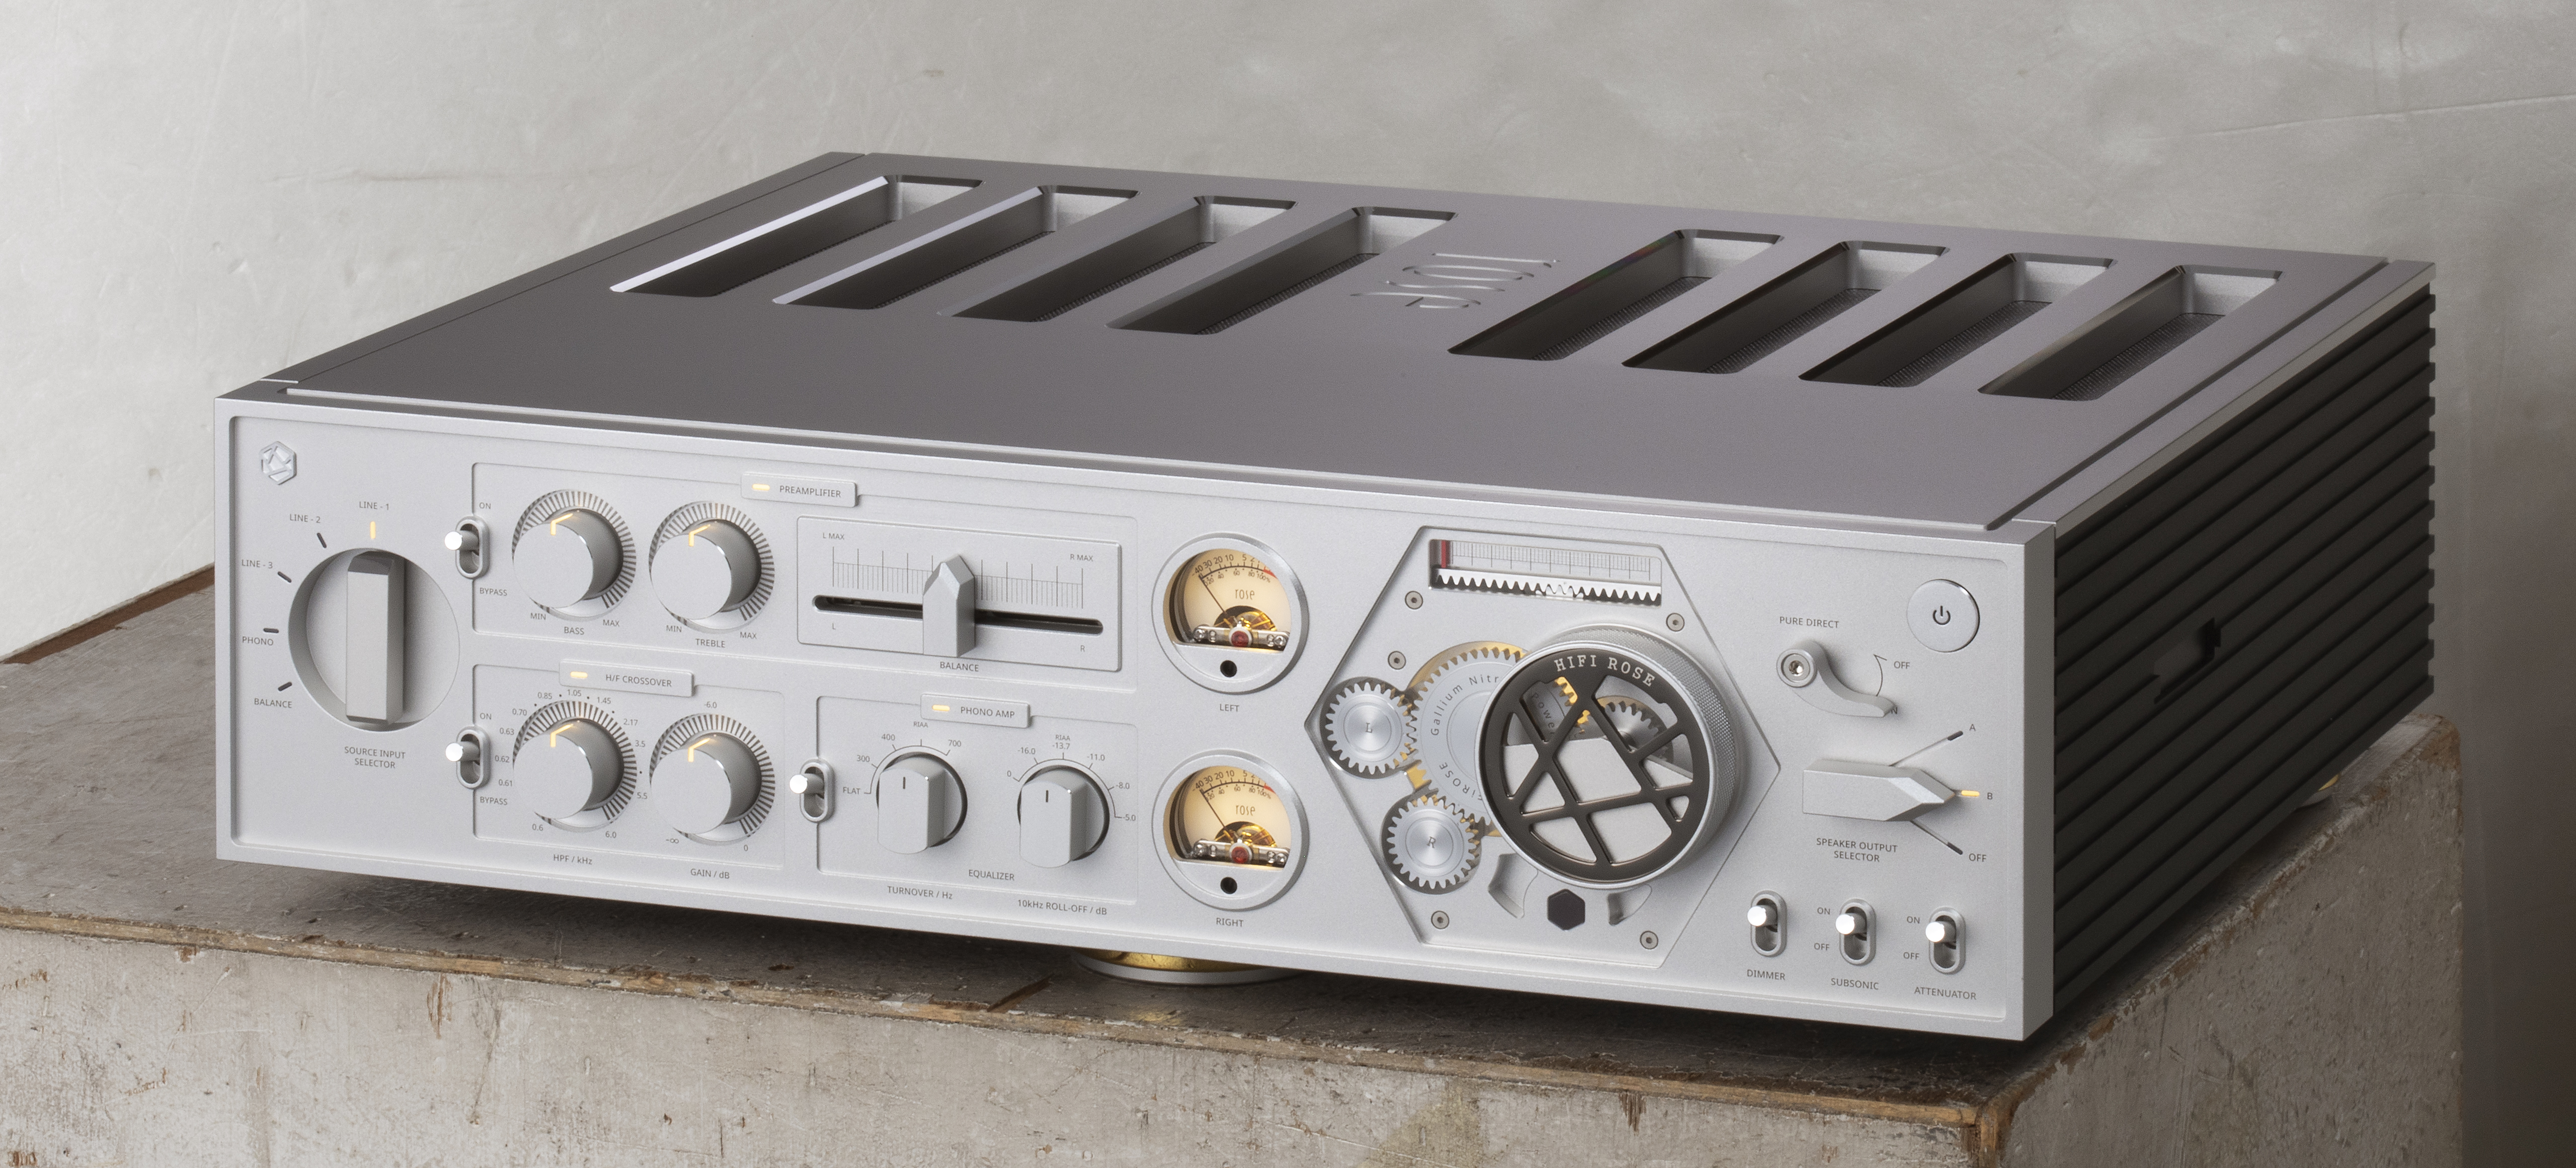 Rose RA180 Integrated Amplifier.